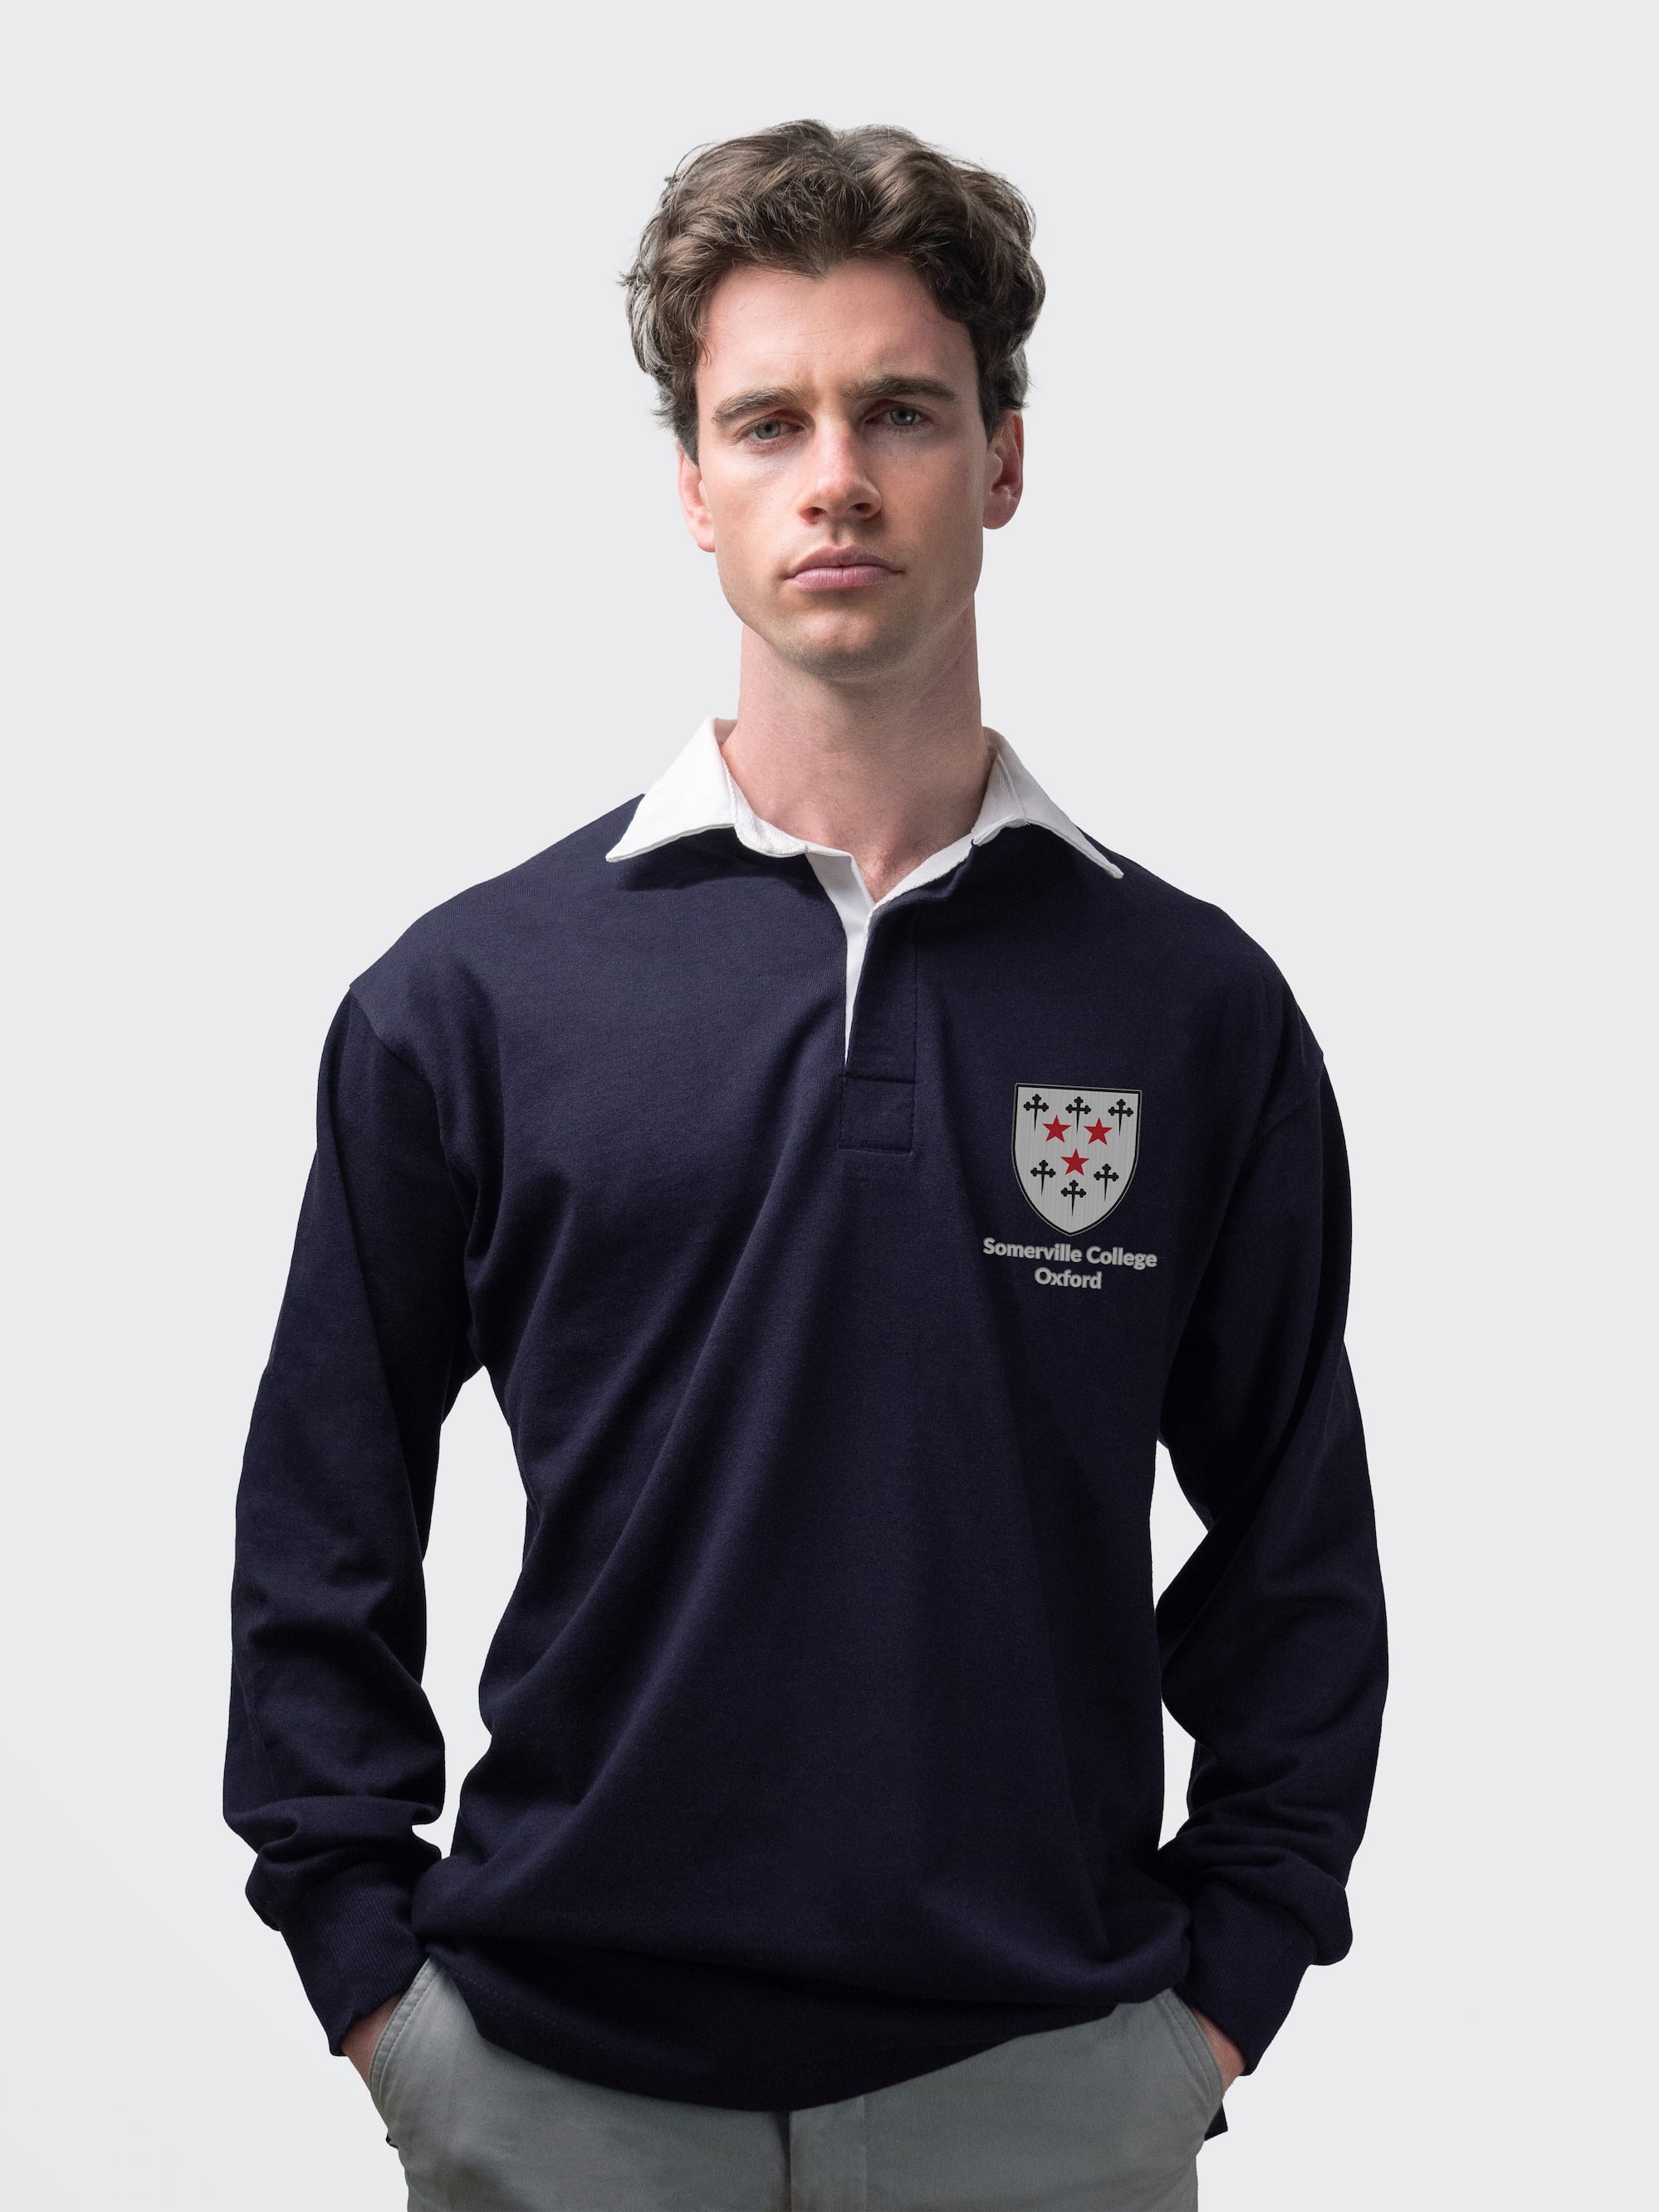 Somerville student wearing an embroidered mens rugby shirt in navy